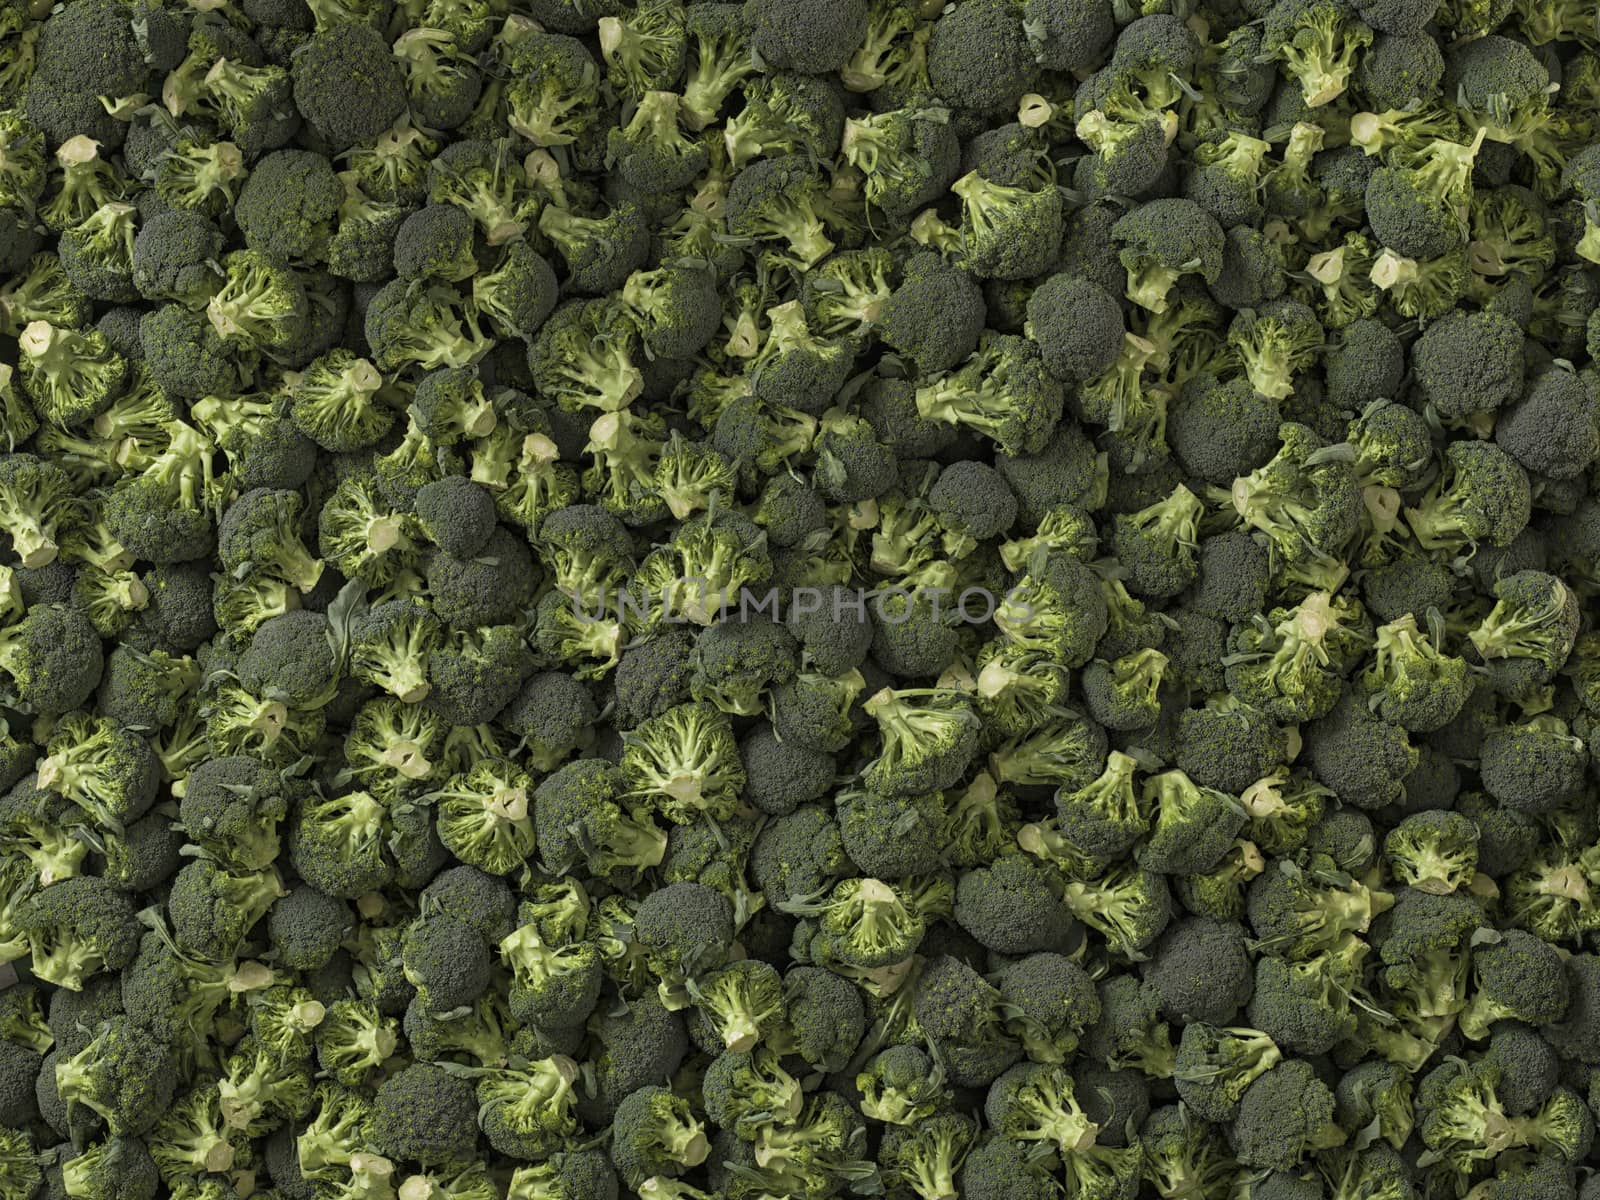 Broccoli texture closeup for any ideas. Fresh vegetables concept by janssenkruseproductions